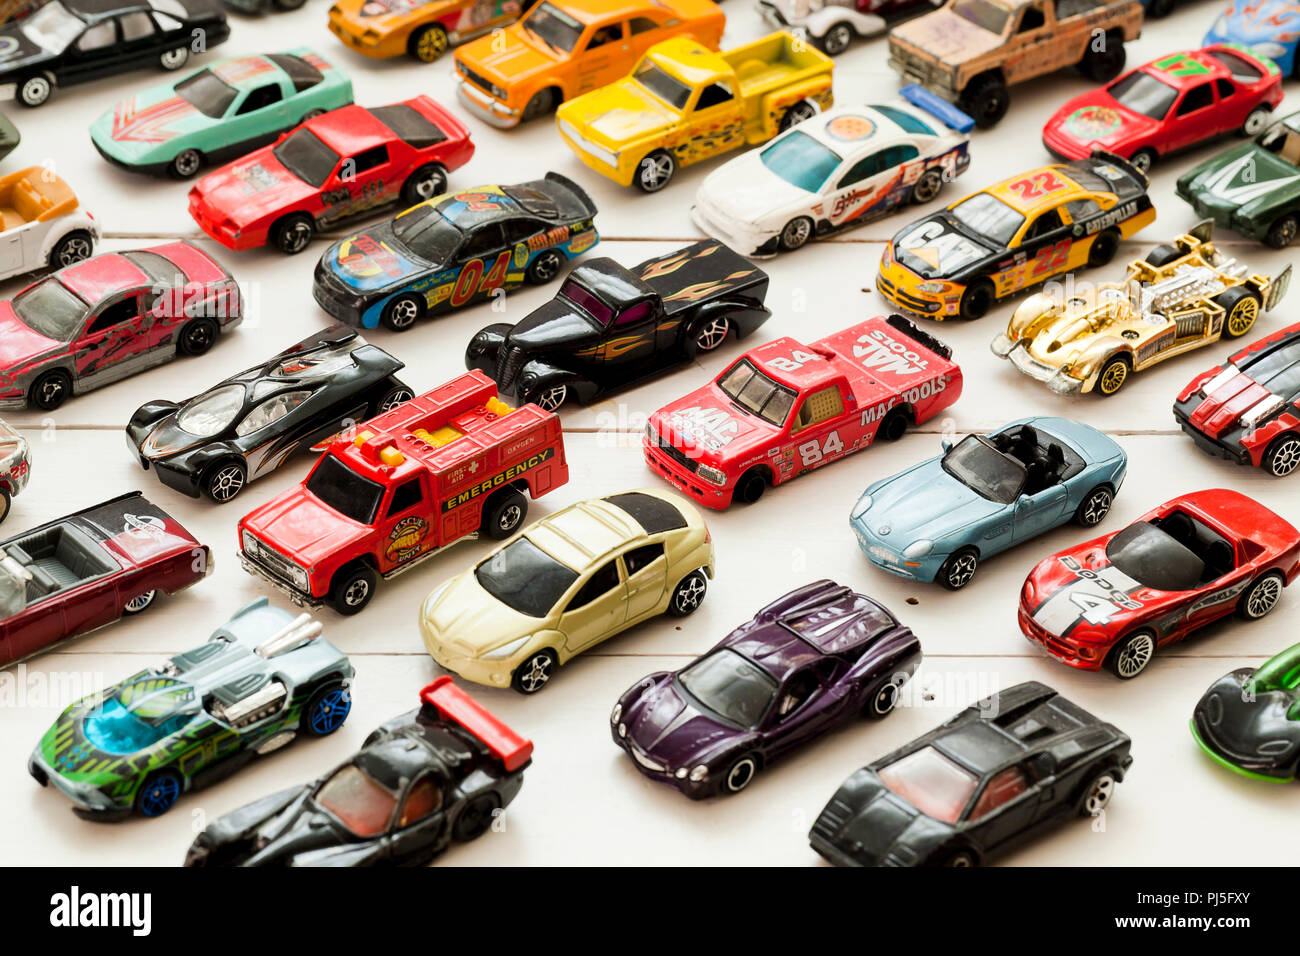 Vintage used Hot Wheels collection on table - USA Stock Photo